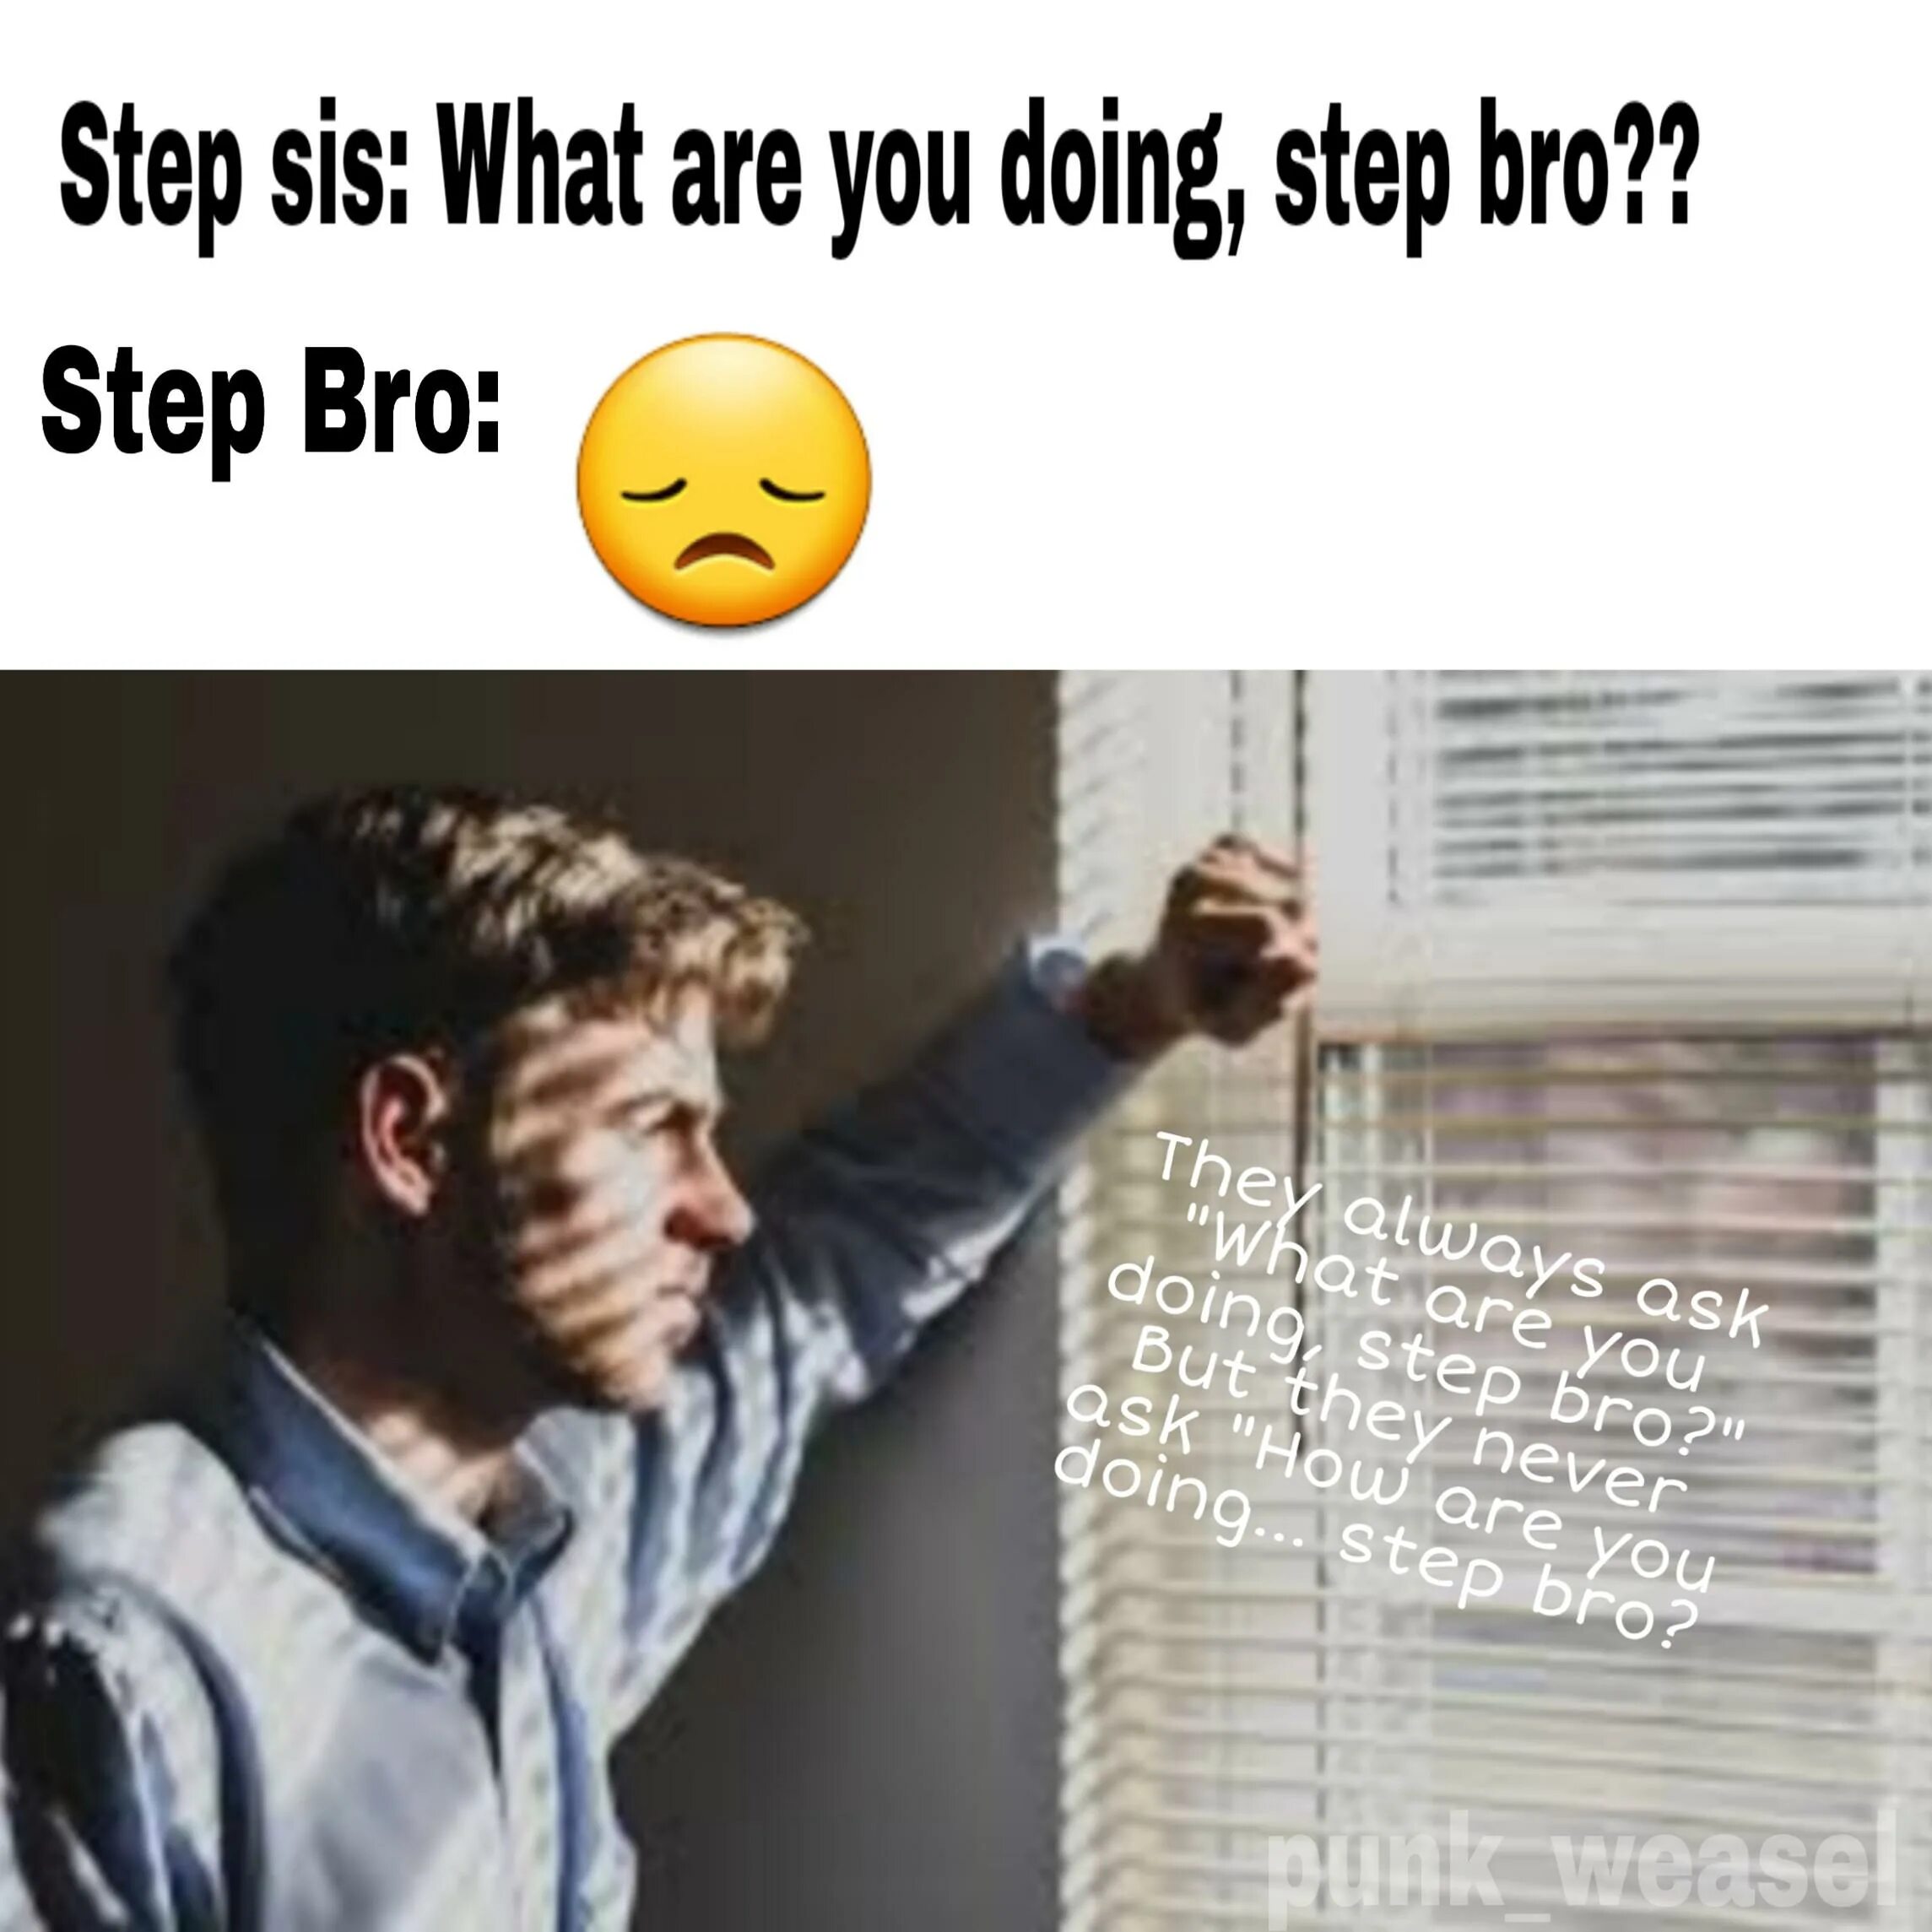 Step bro. What are you doing Step bro. Мем stepbro. What are you doing Step sister.